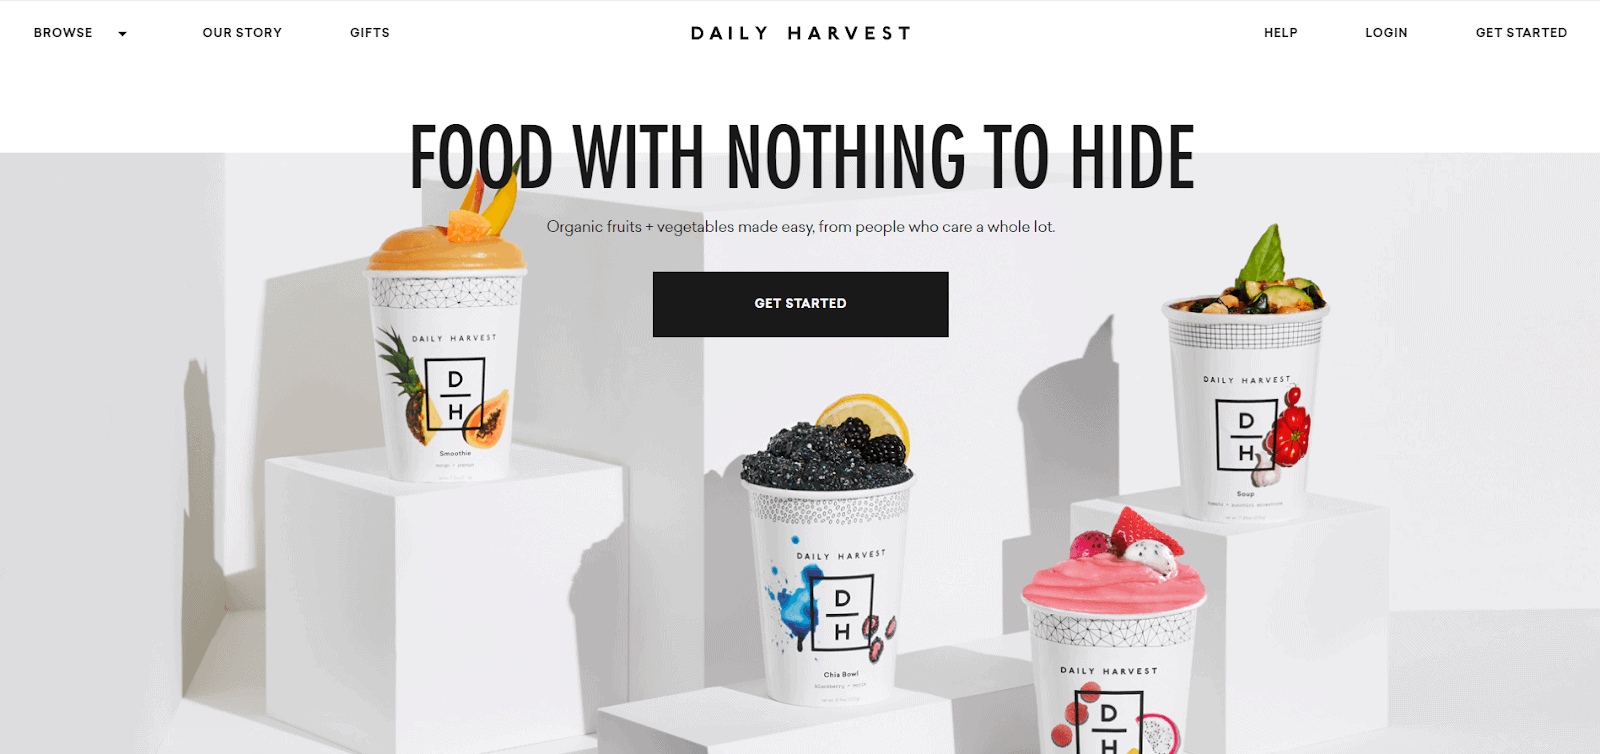 Healthy food delivery service: Daily Harvest